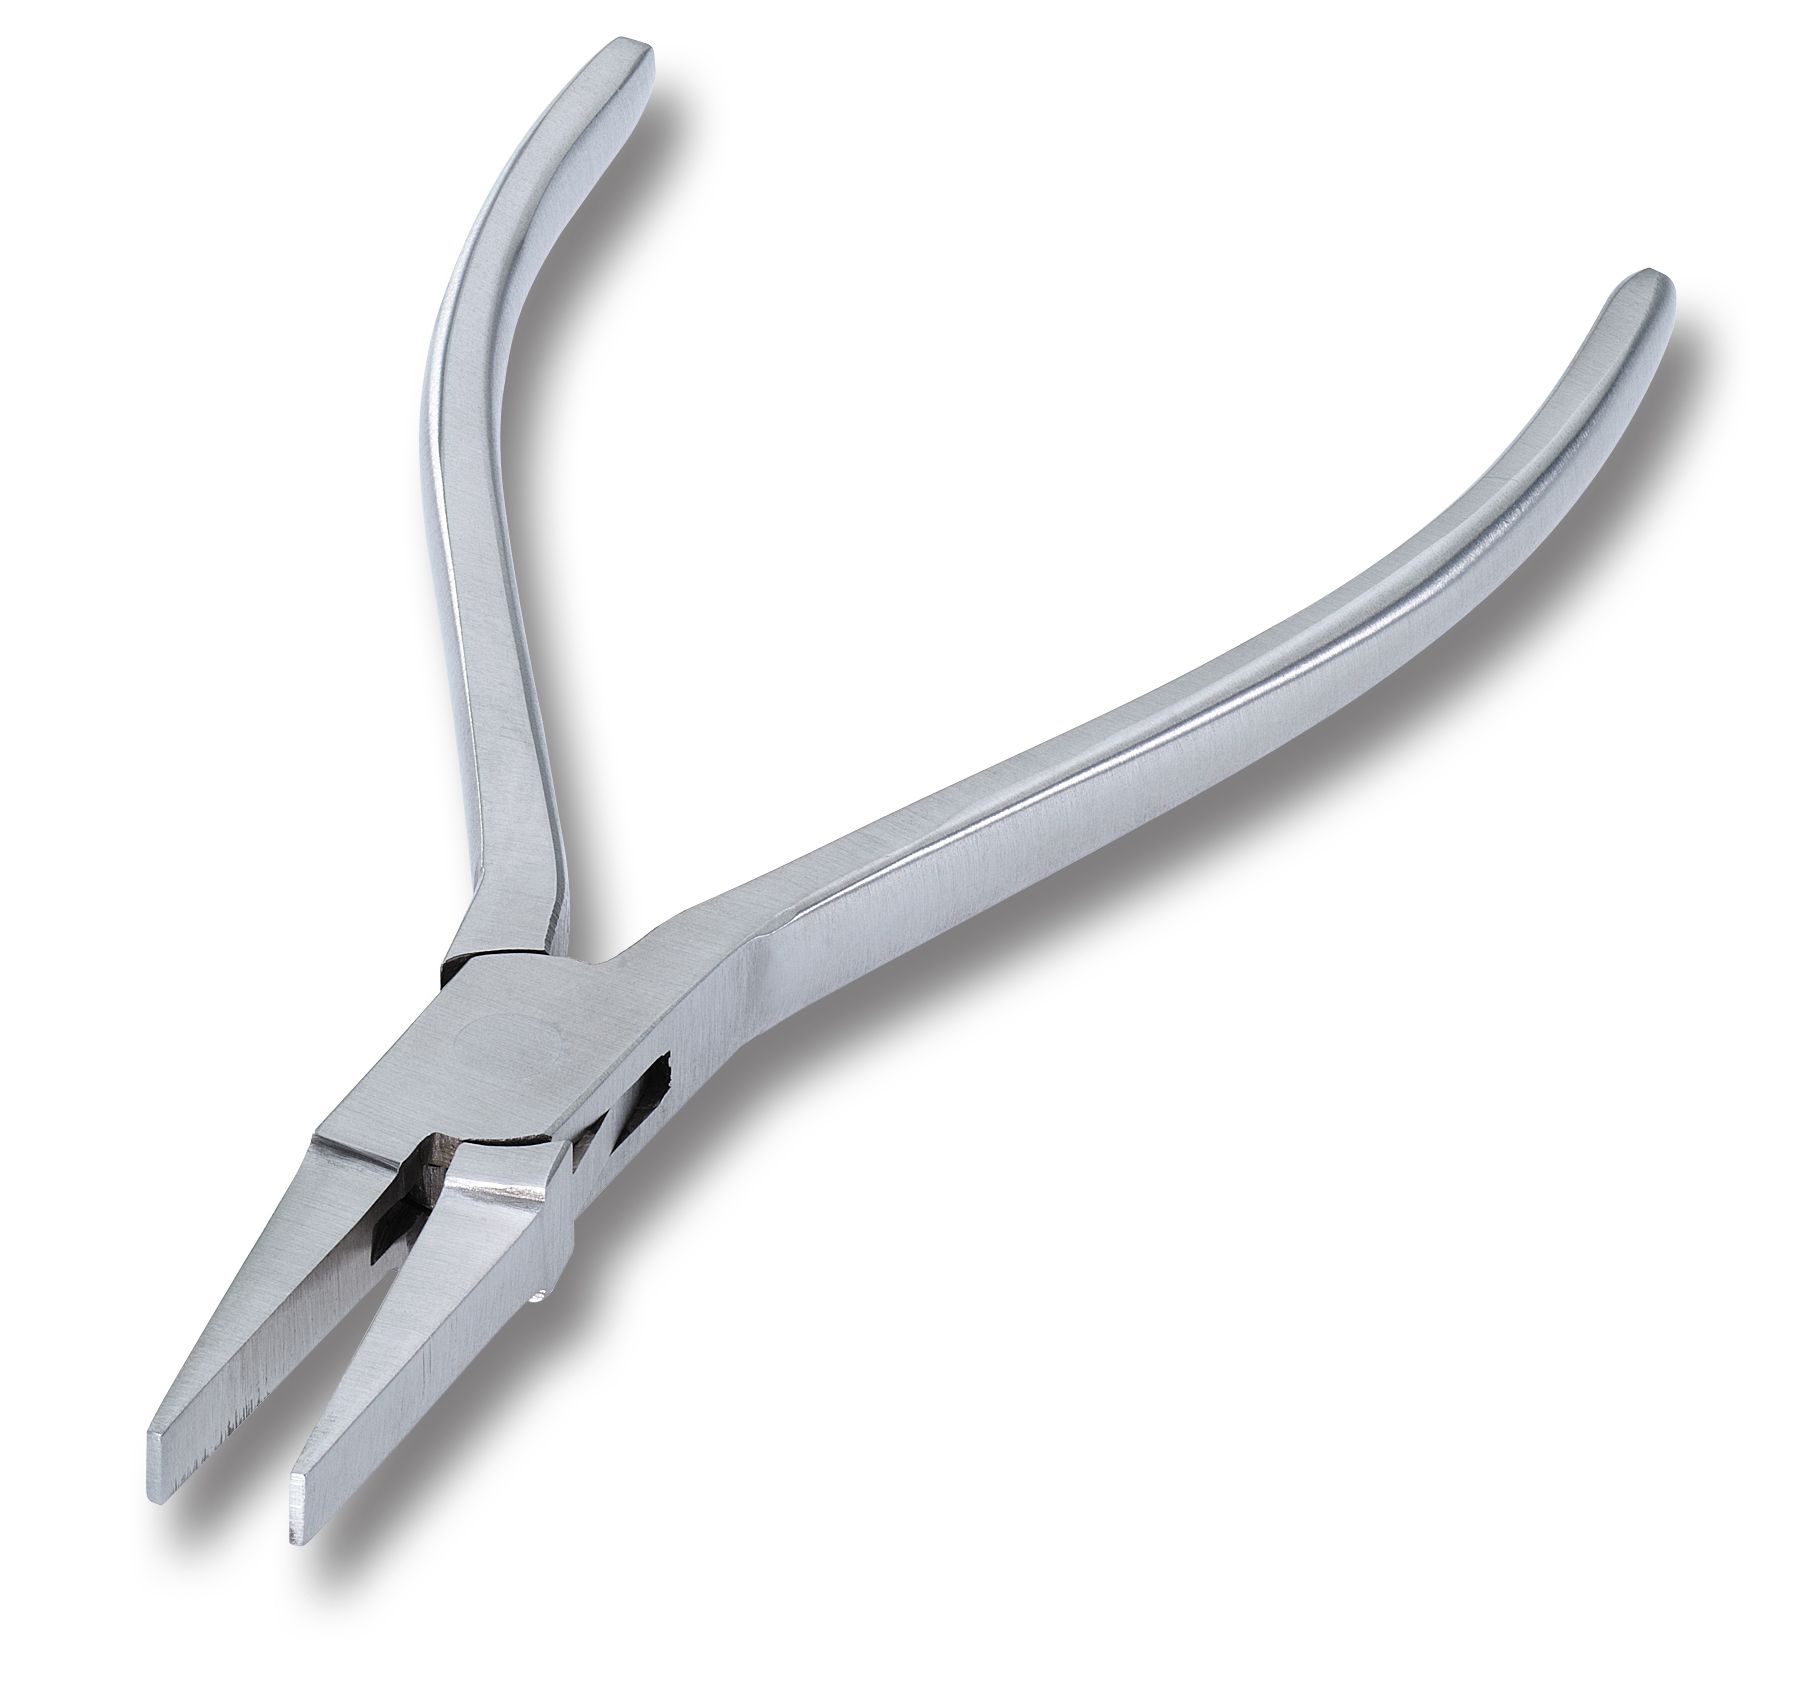 Watchmaker's flat nose pliers